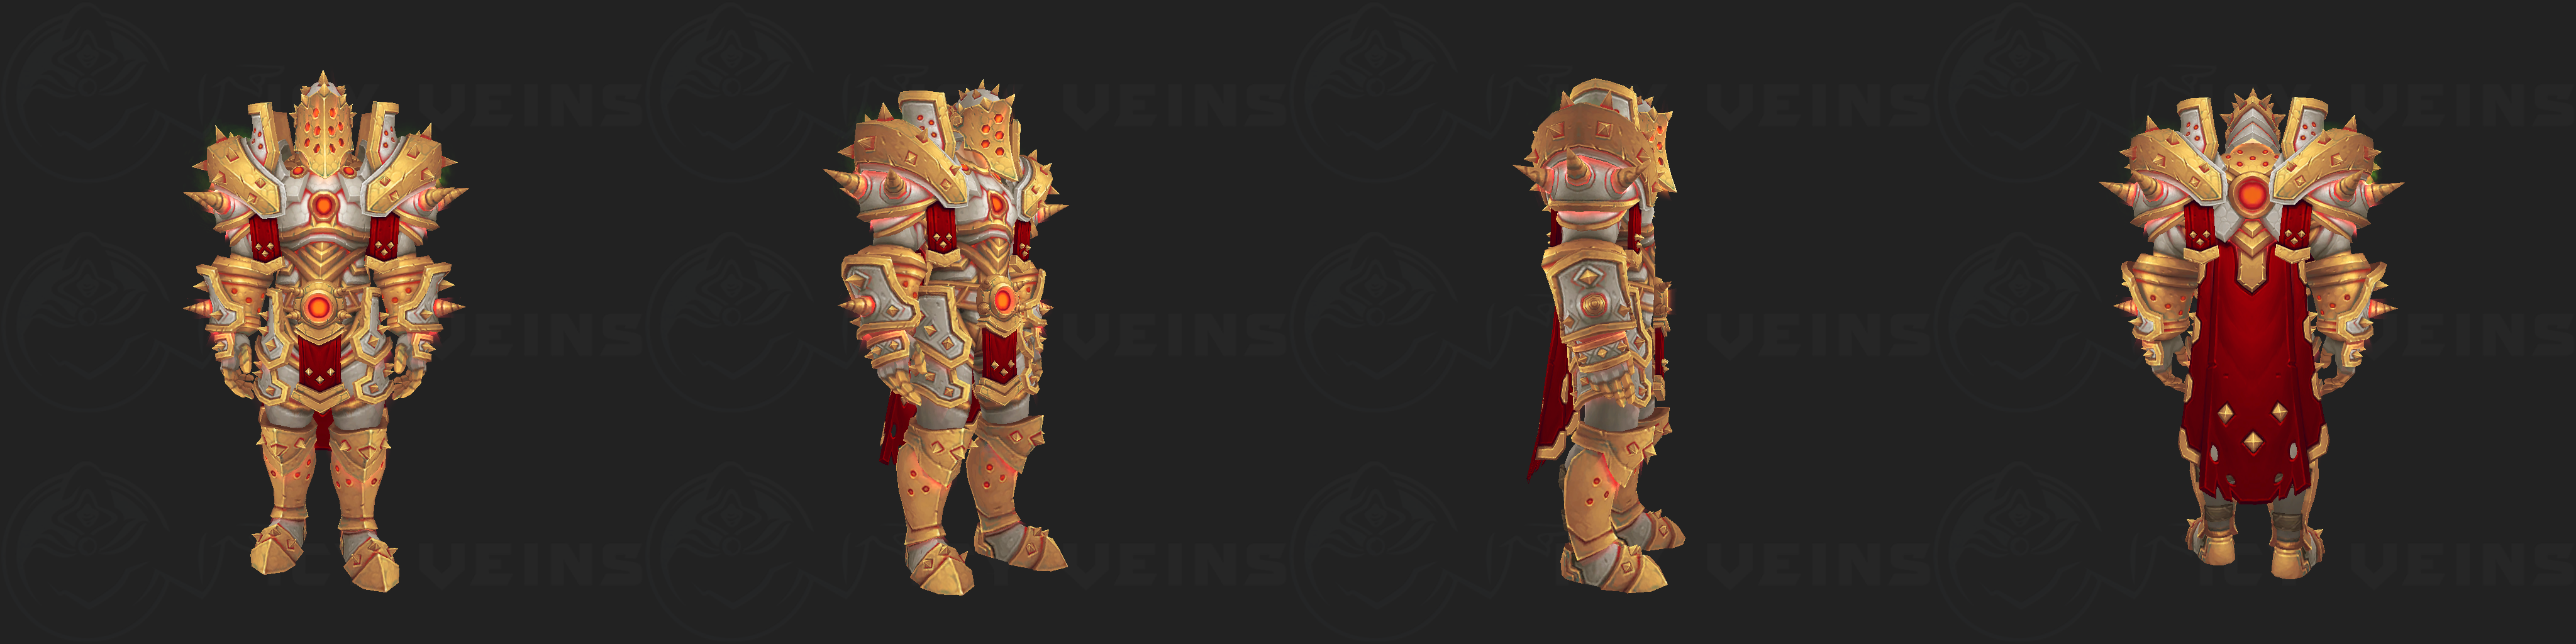 warrior_mage_tower_set.png